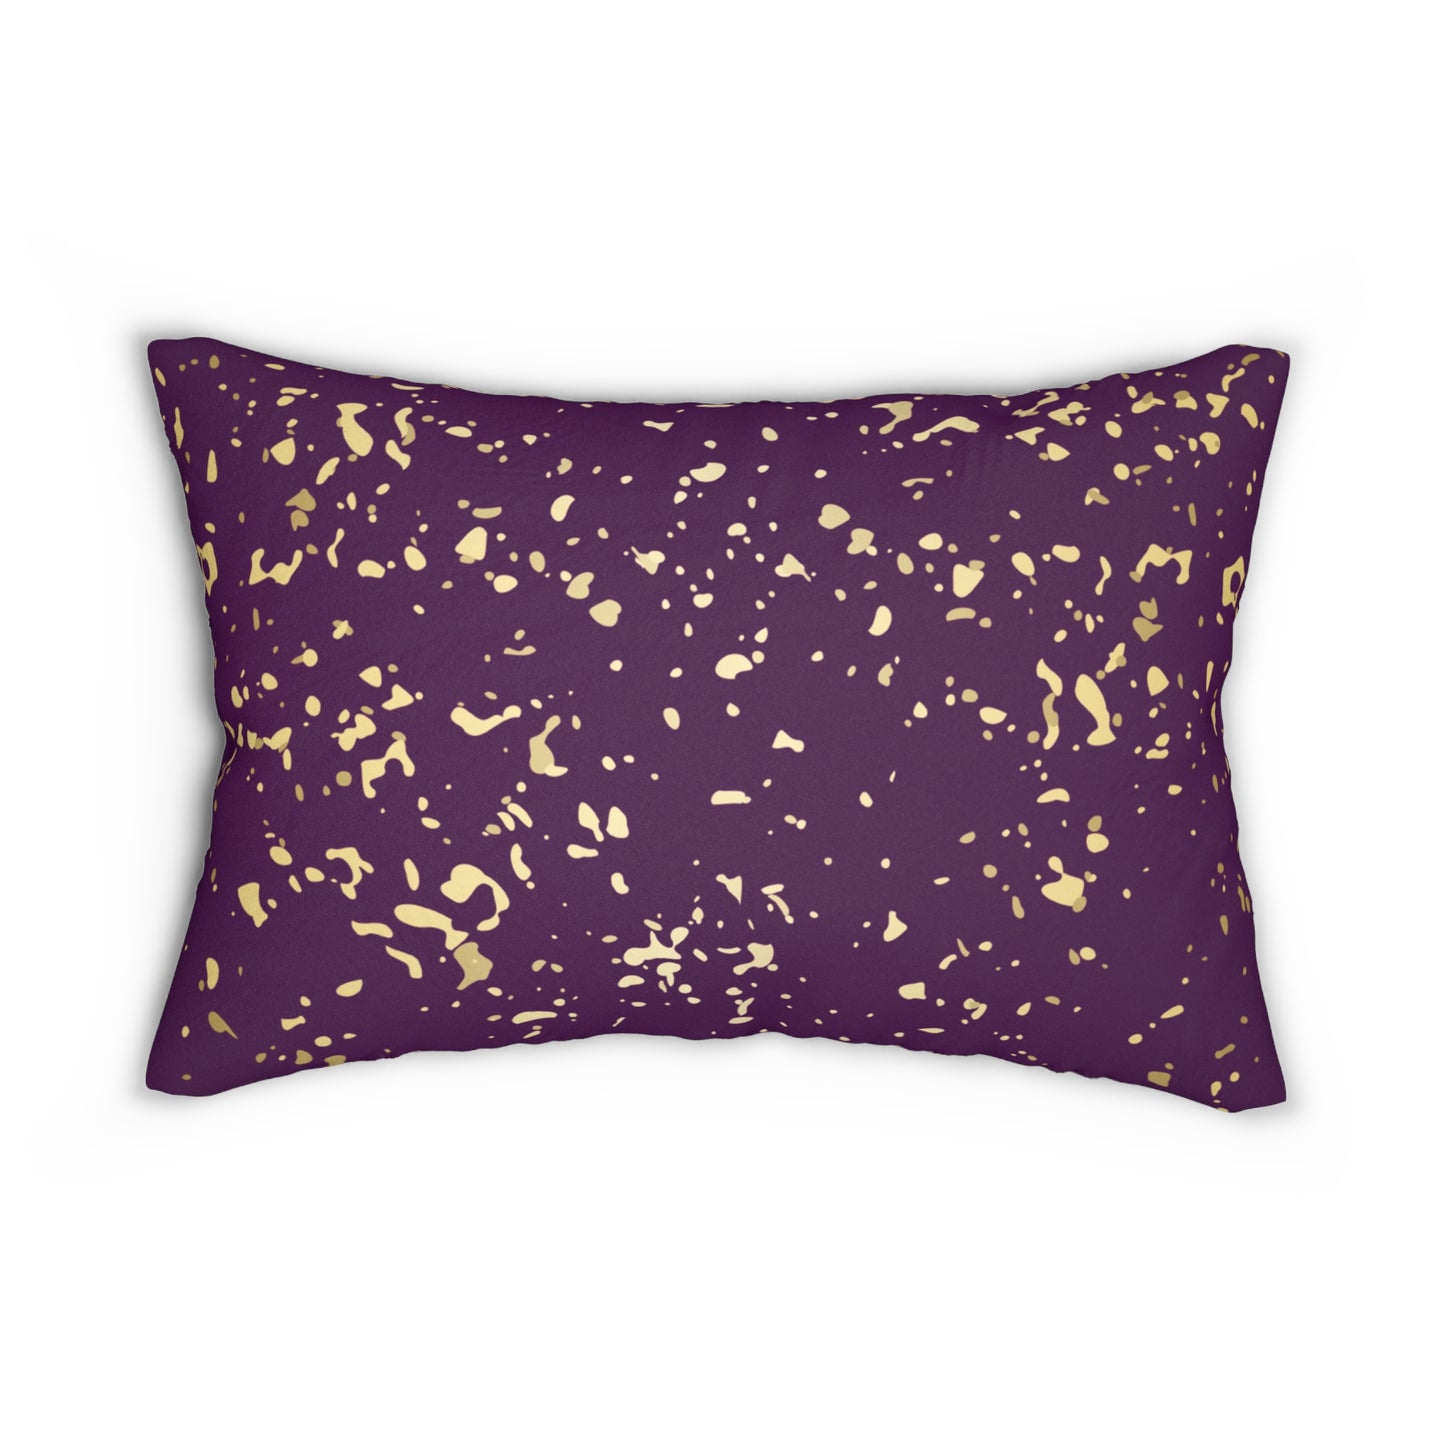 Eggplant and Gold Flakes Accent Pillow